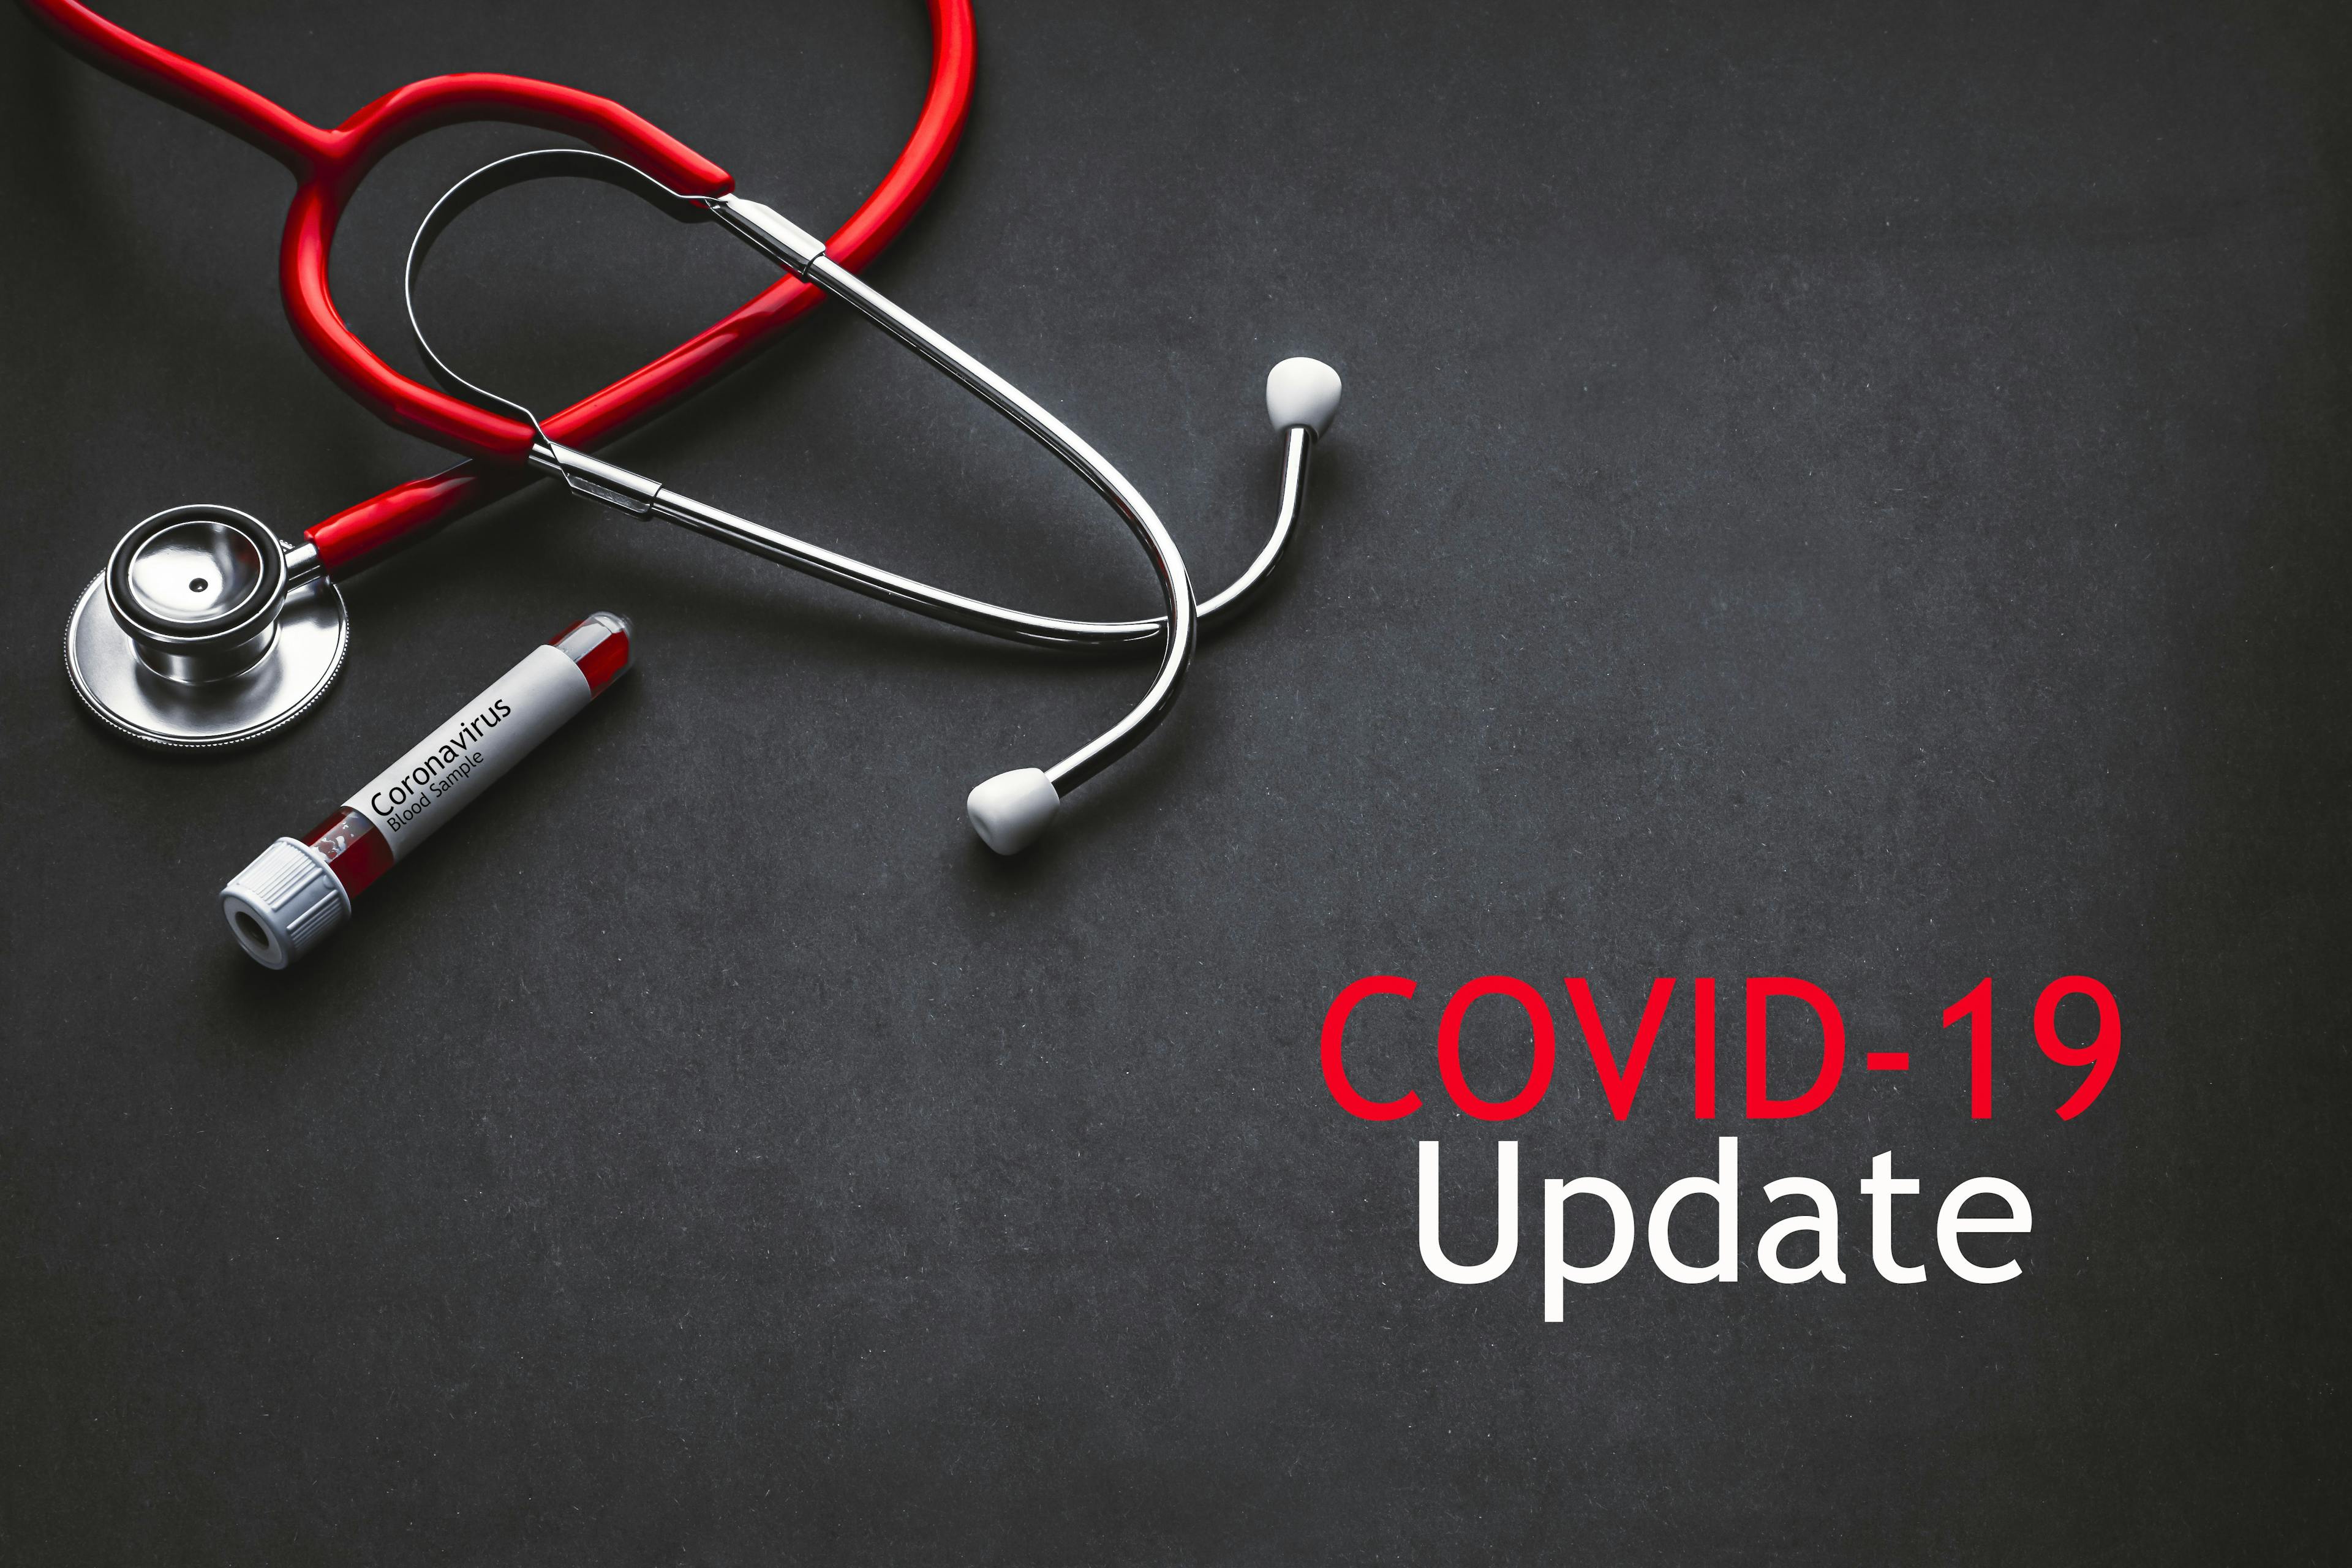 COVID-19 Updates: US Vaccinations and Global Cases and Deaths as of April 7, 2021